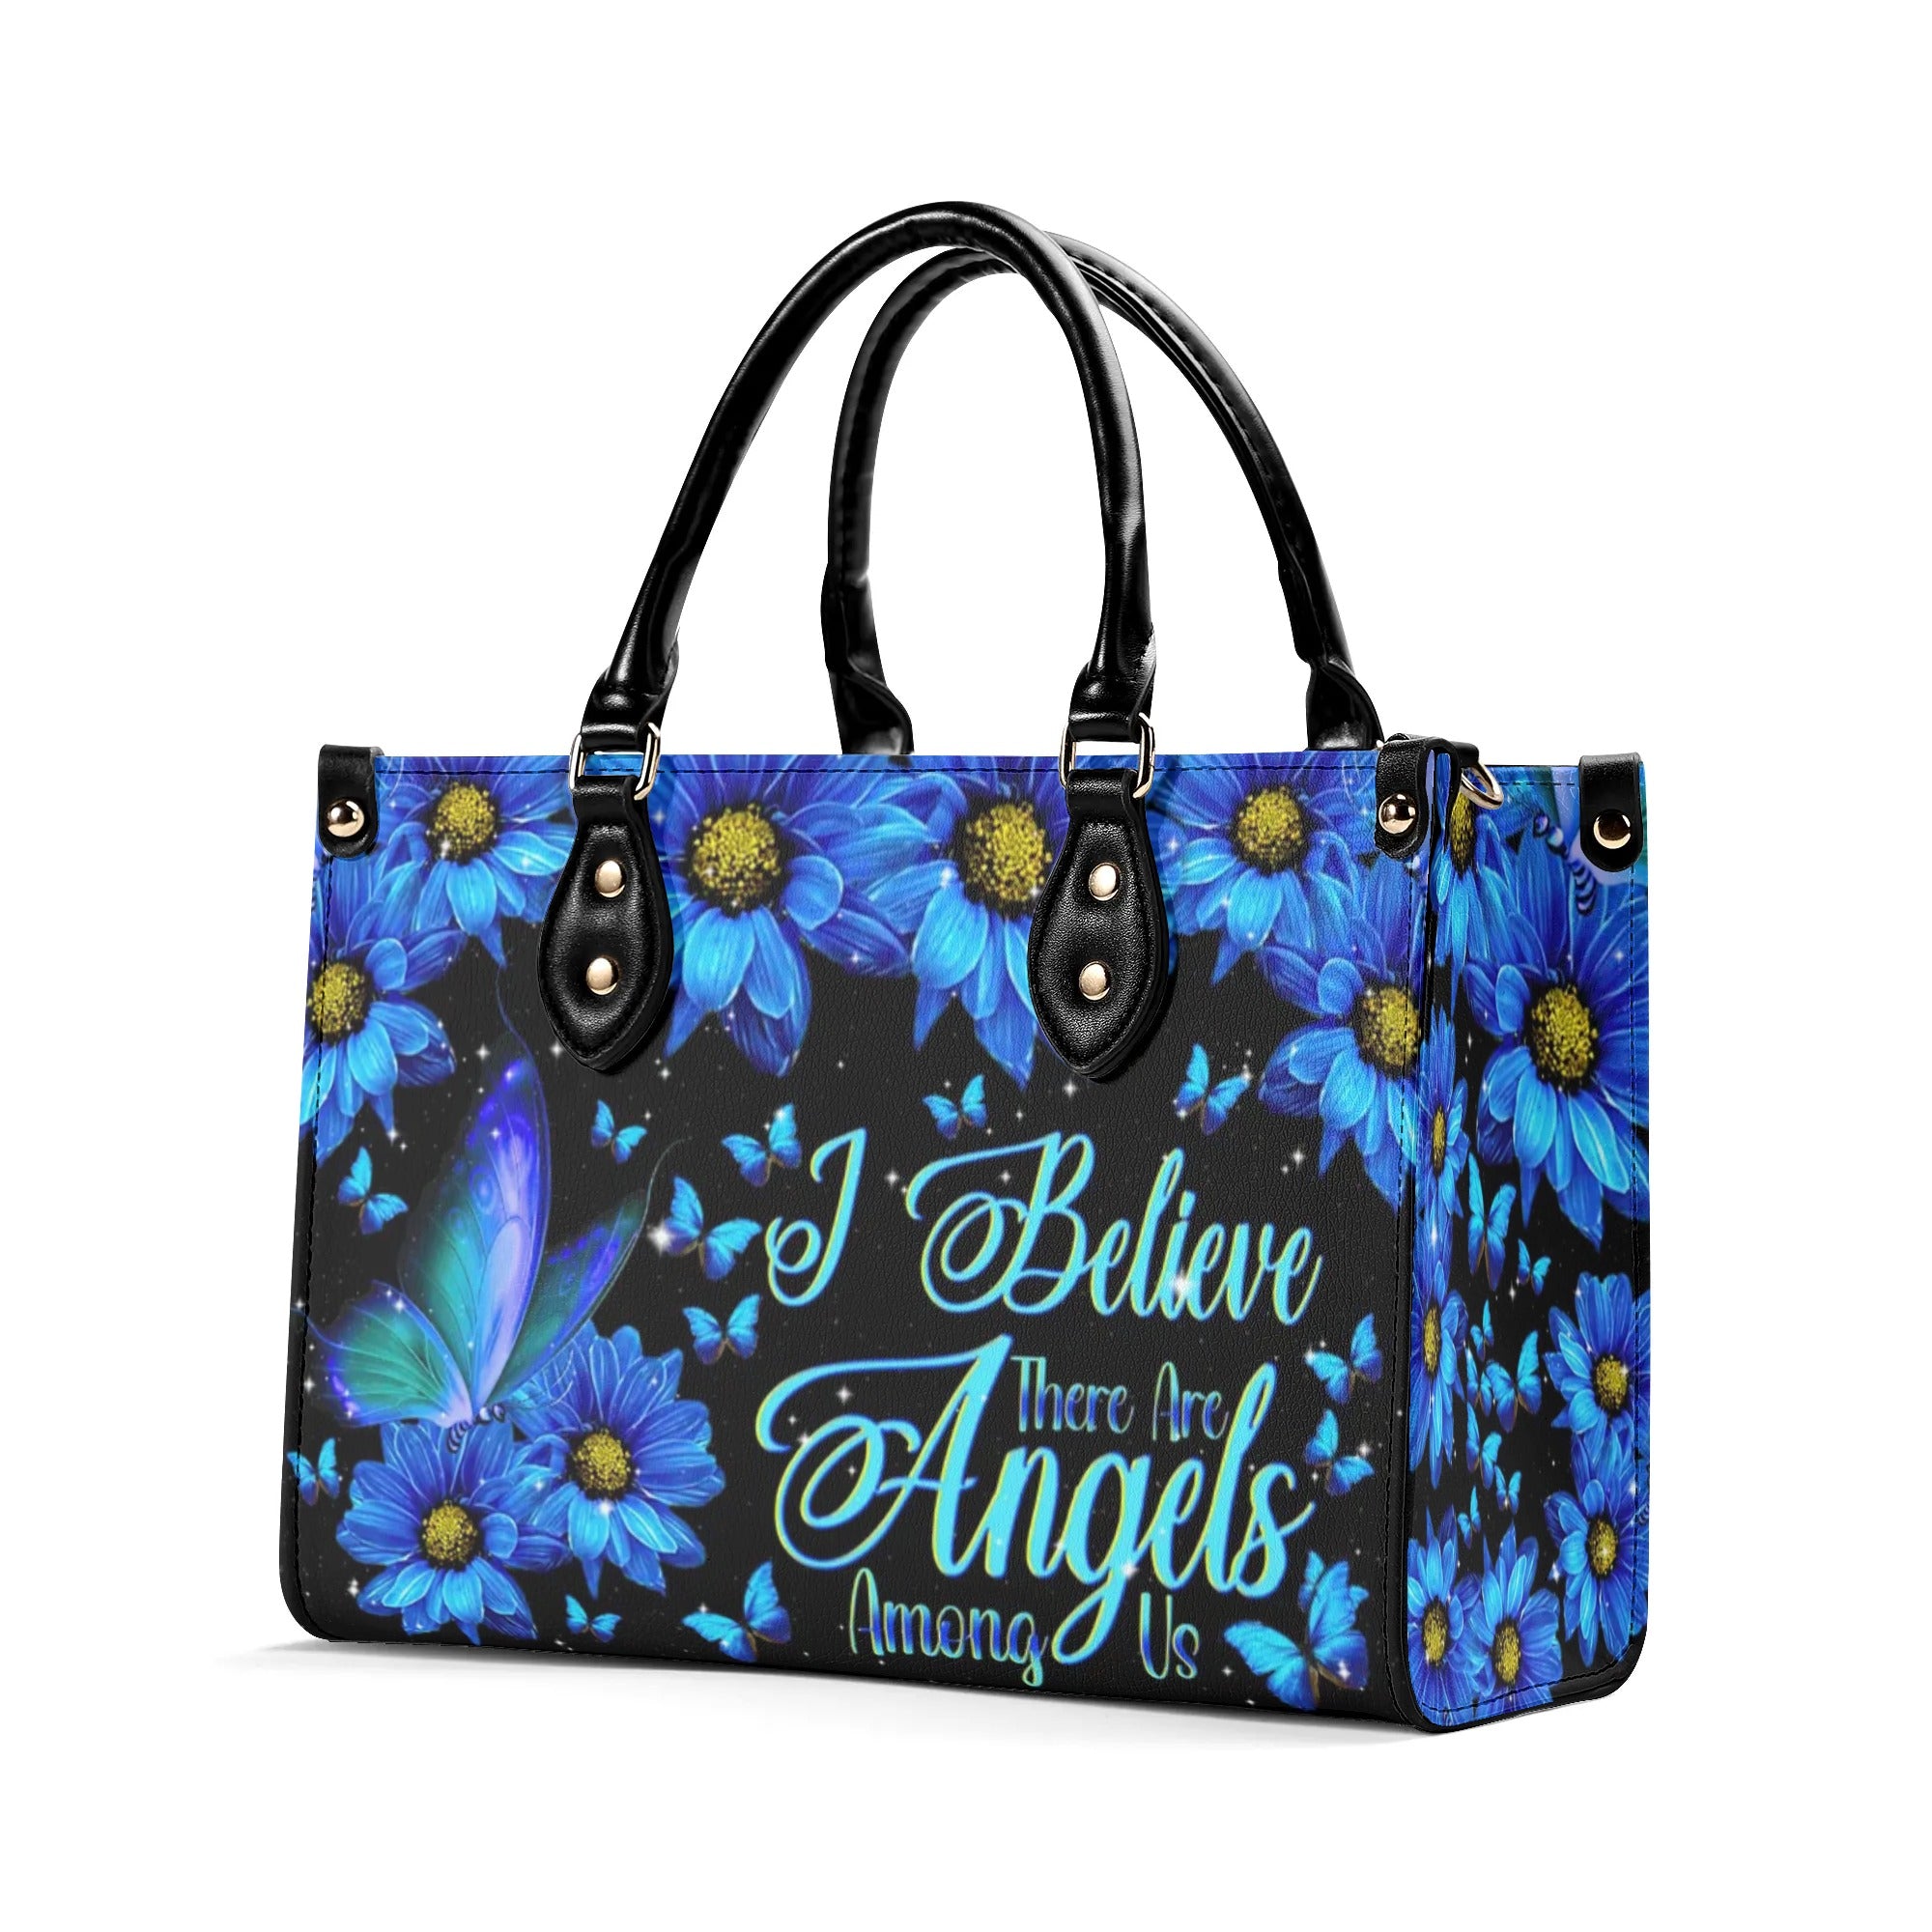 I BELIEVE THERE ARE ANGELS AMONG US BUTTERFLY LEATHER HANDBAG - TLNT1806244